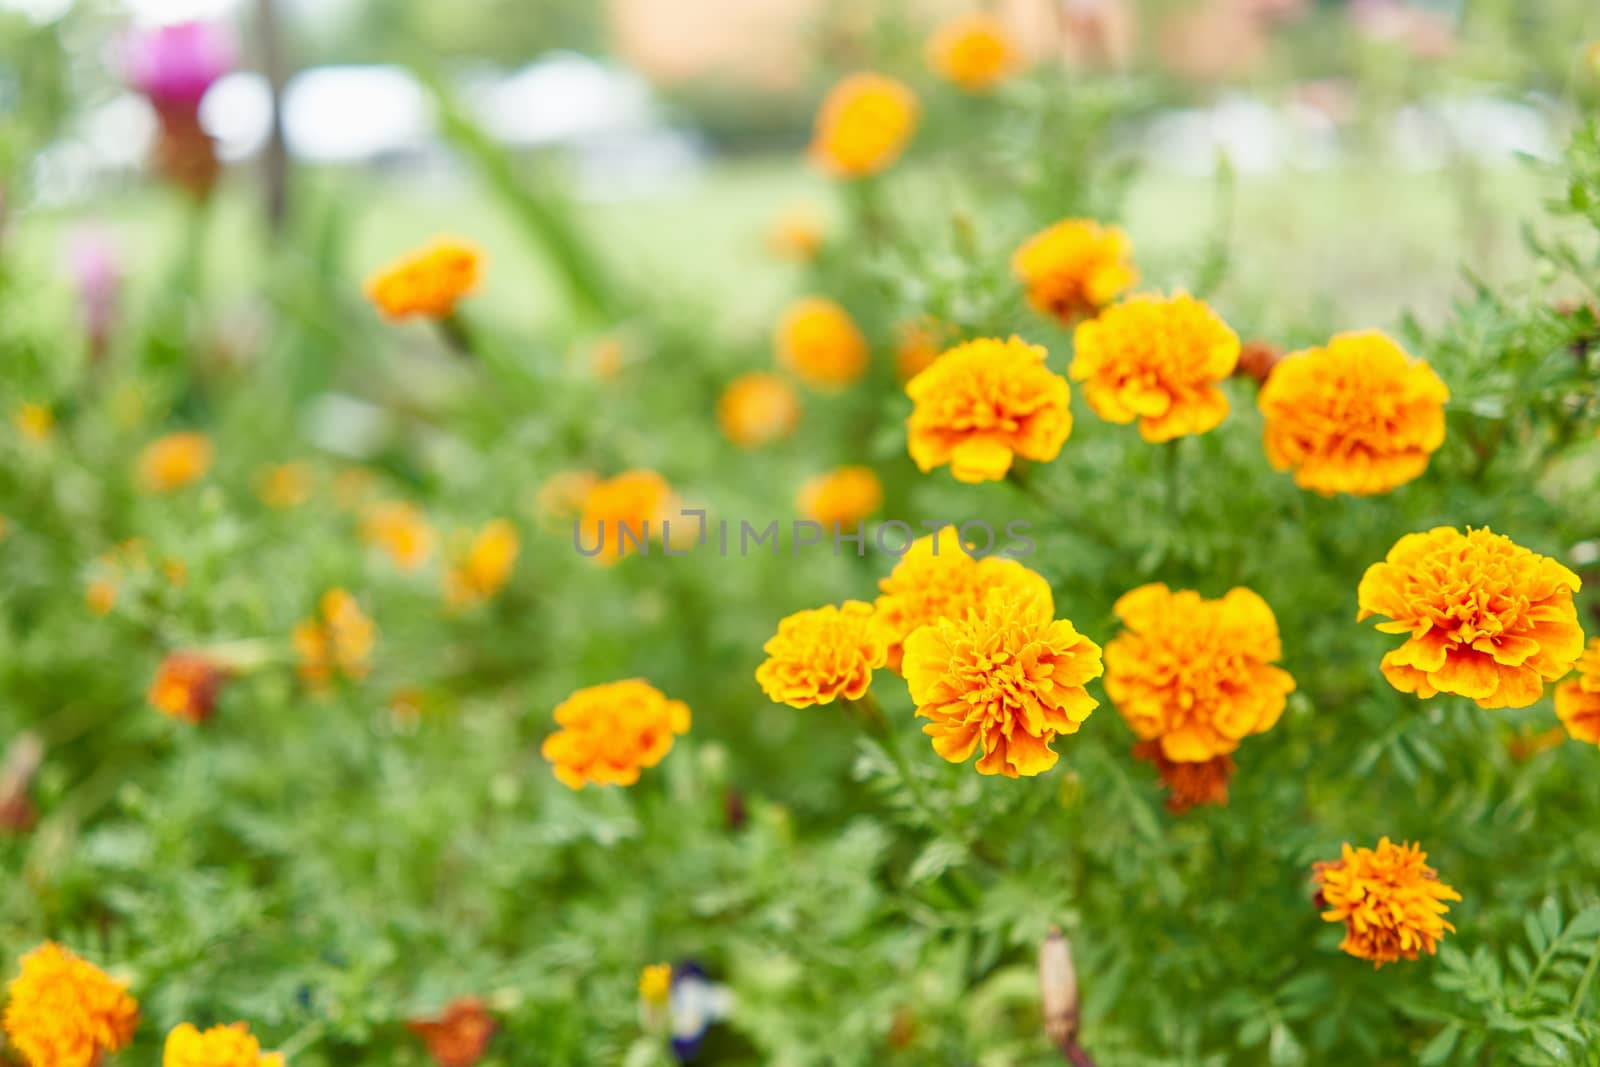 Tagetes erecta or marigold have yellow and orange flower by eaglesky